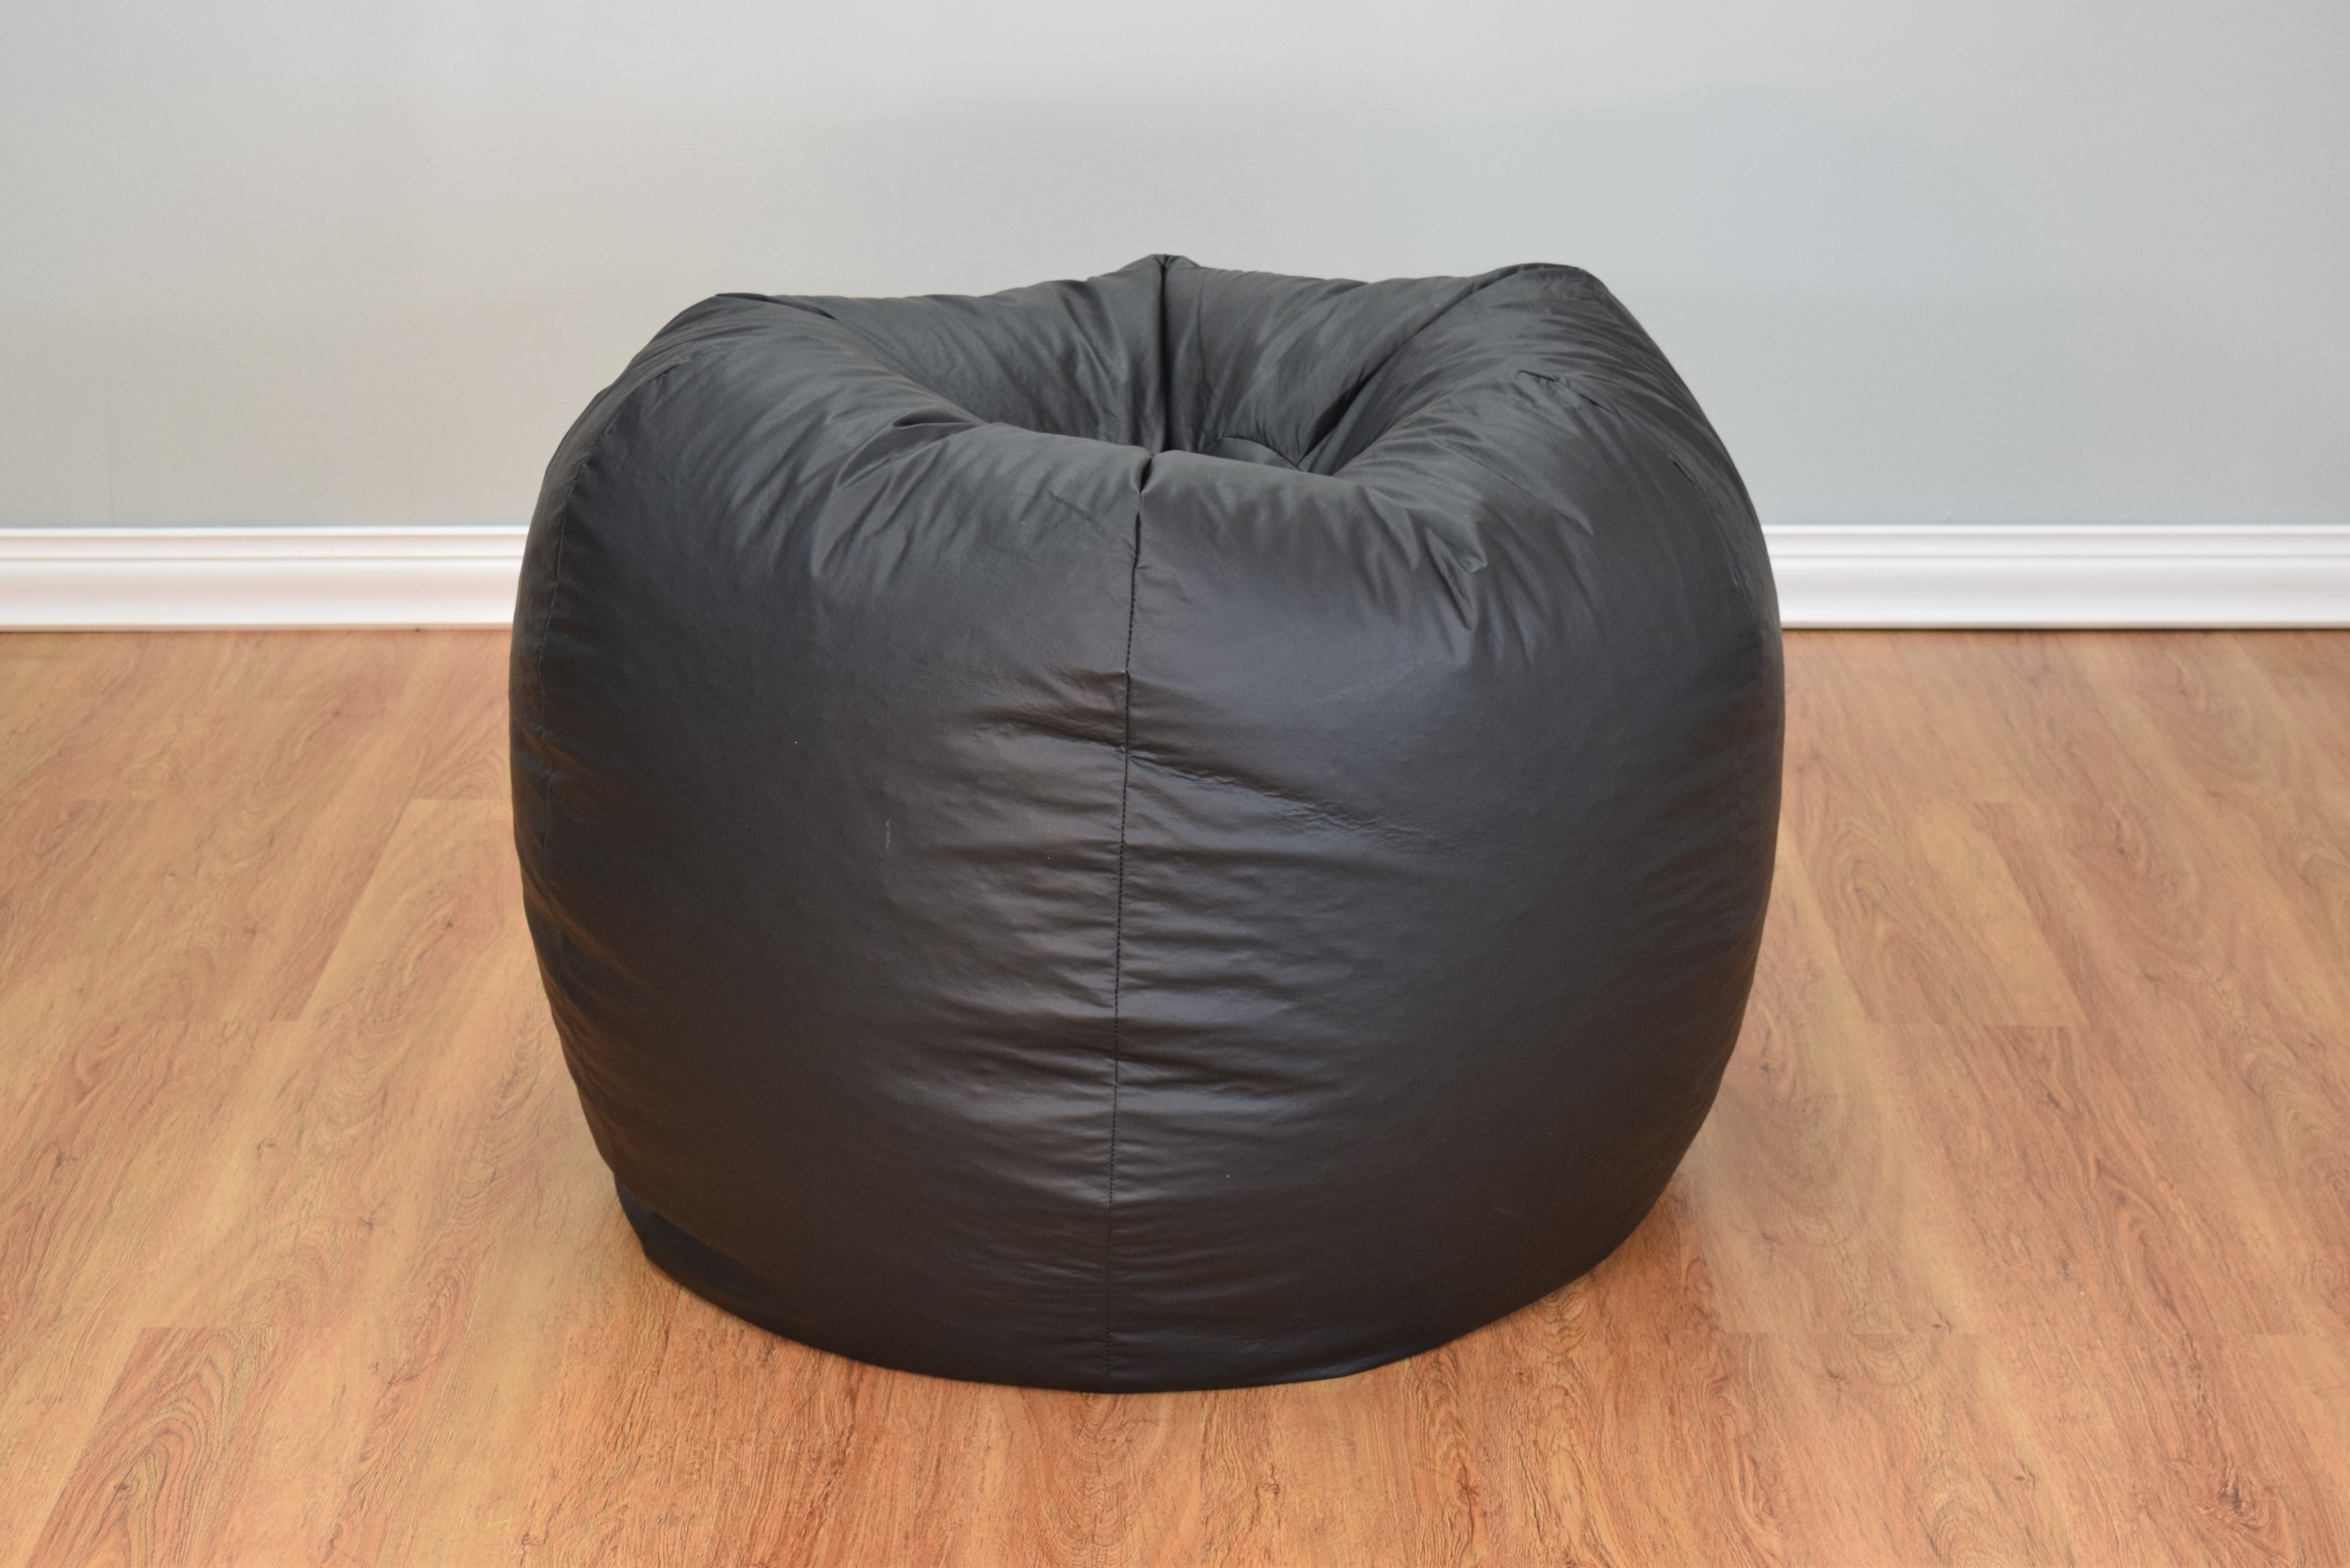 ACEssentials132" Round Extra Large Shiny Bean Bag, Multiple Colors - image 3 of 4